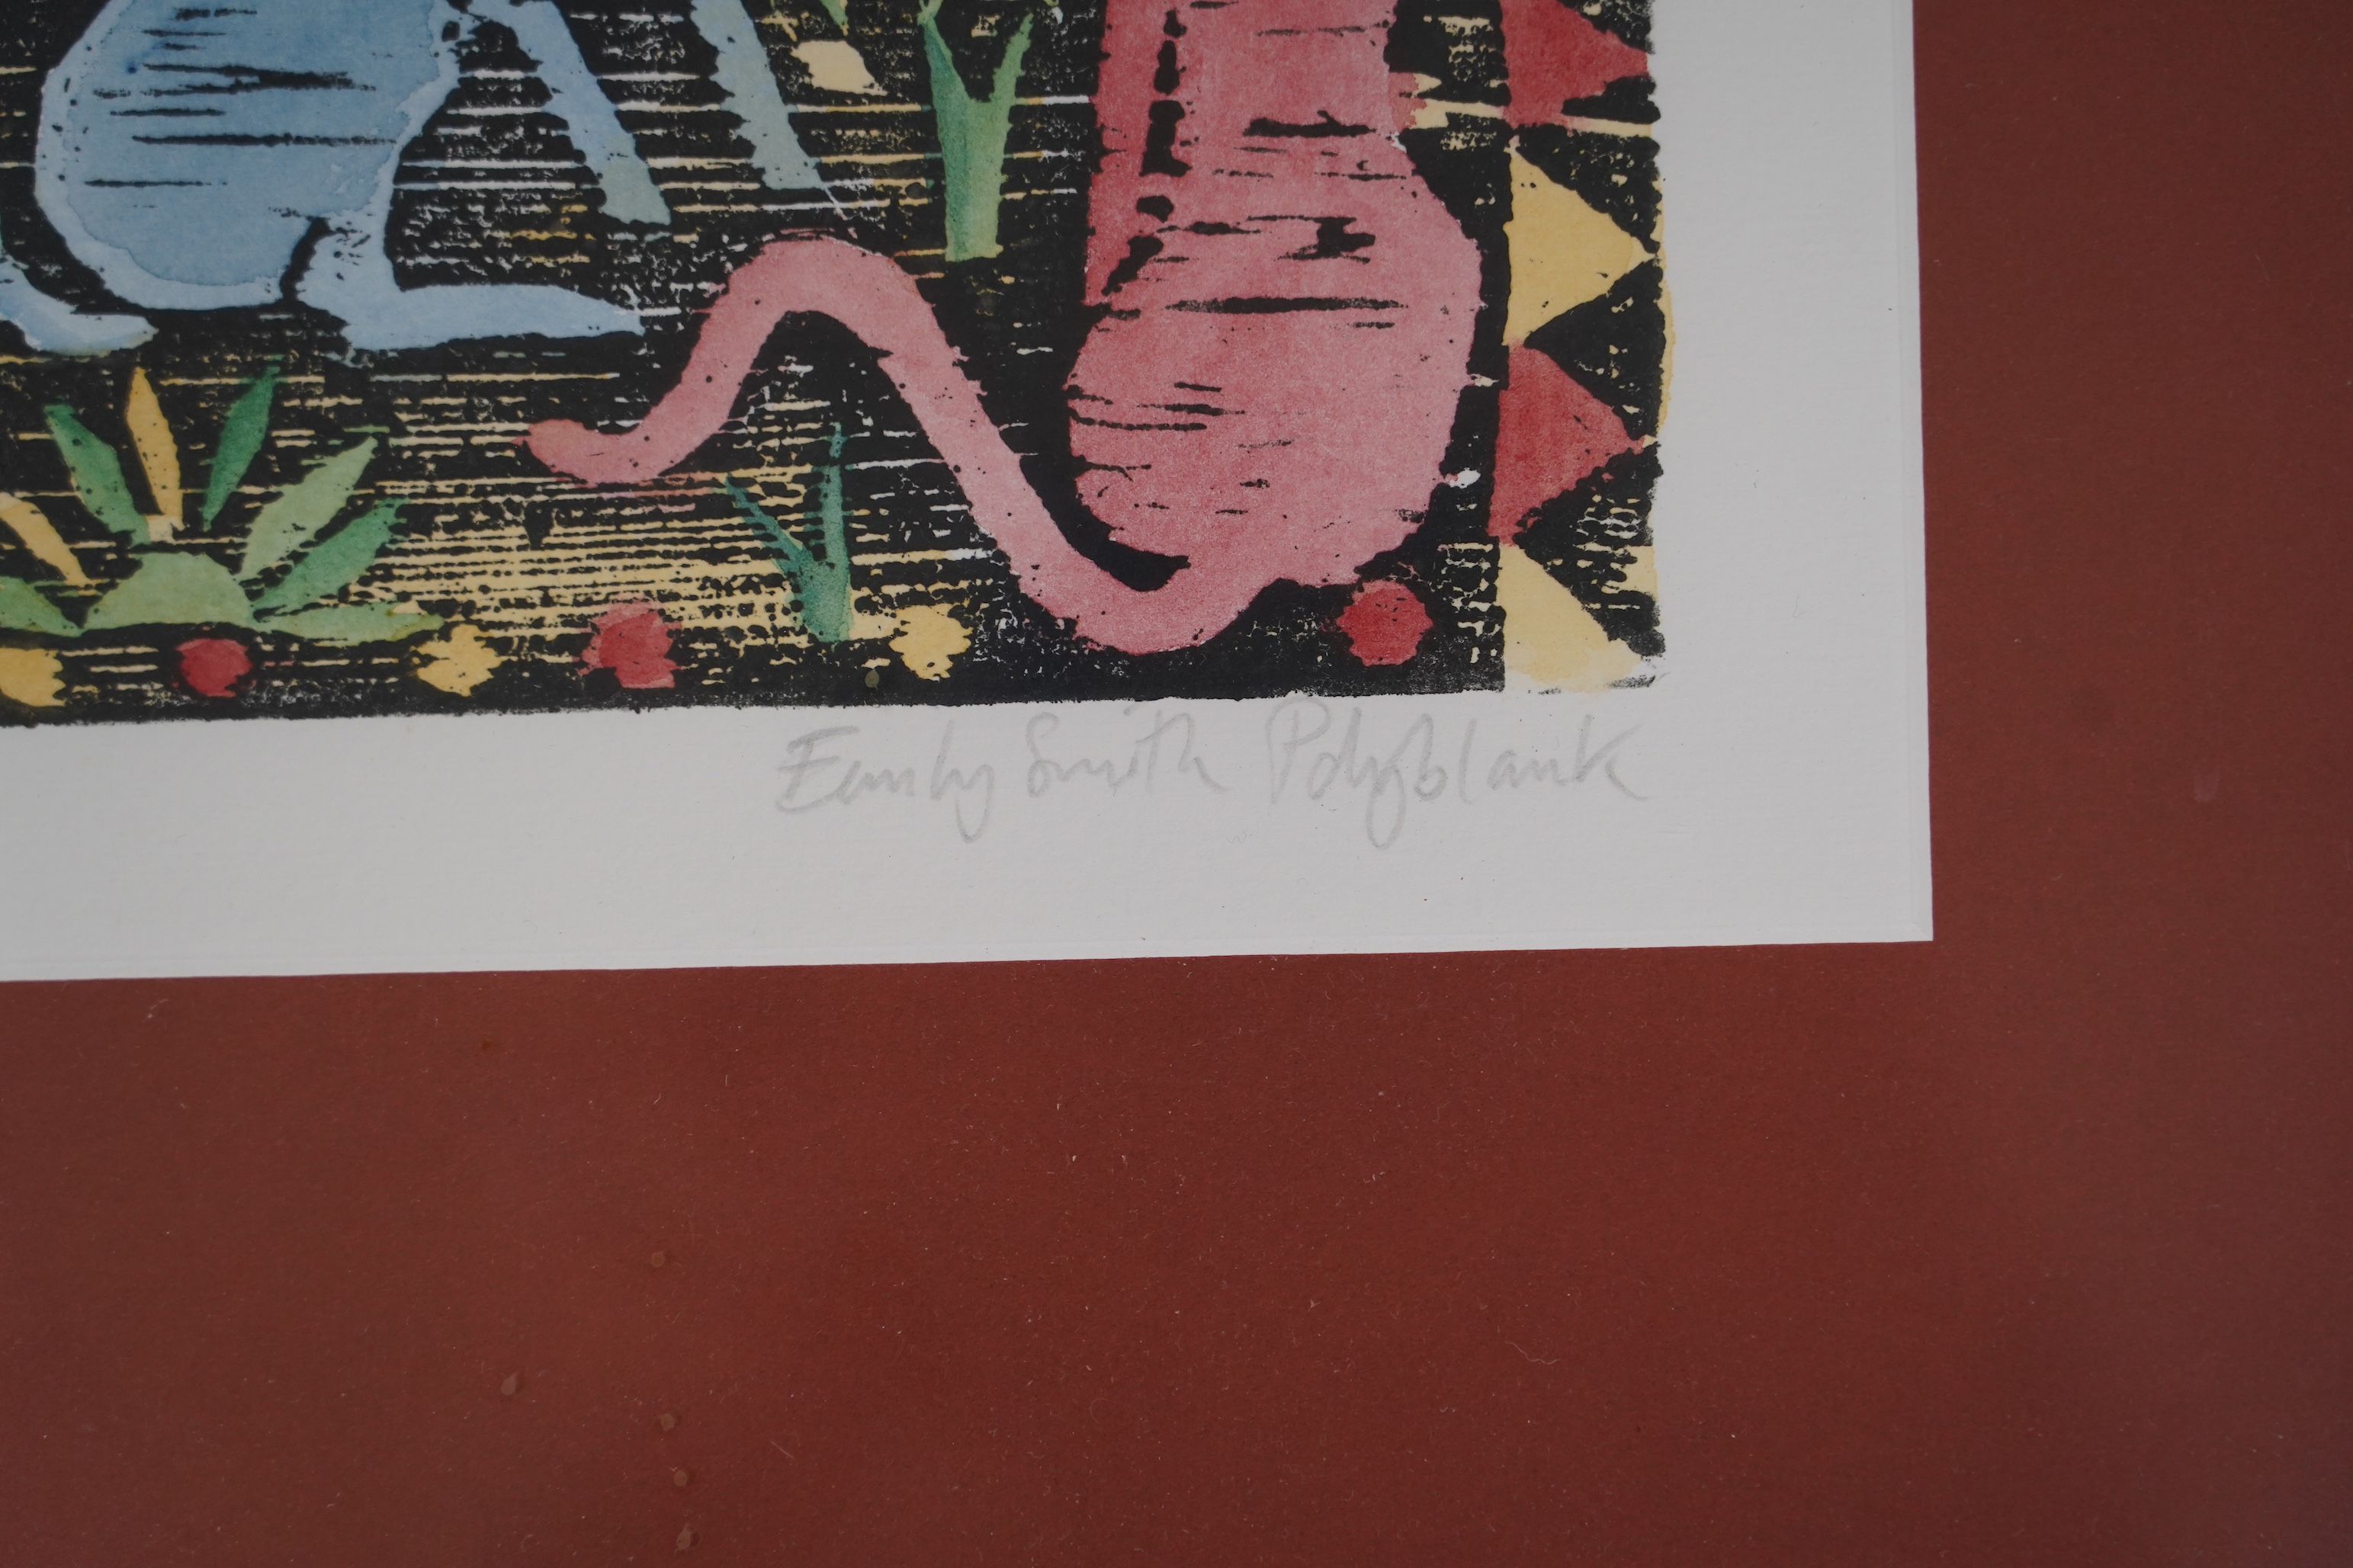 Emily Smith Polyblank, linocut, 'It's an animals life', signed in pencil, limited edition 39/100, 26 x 70cm